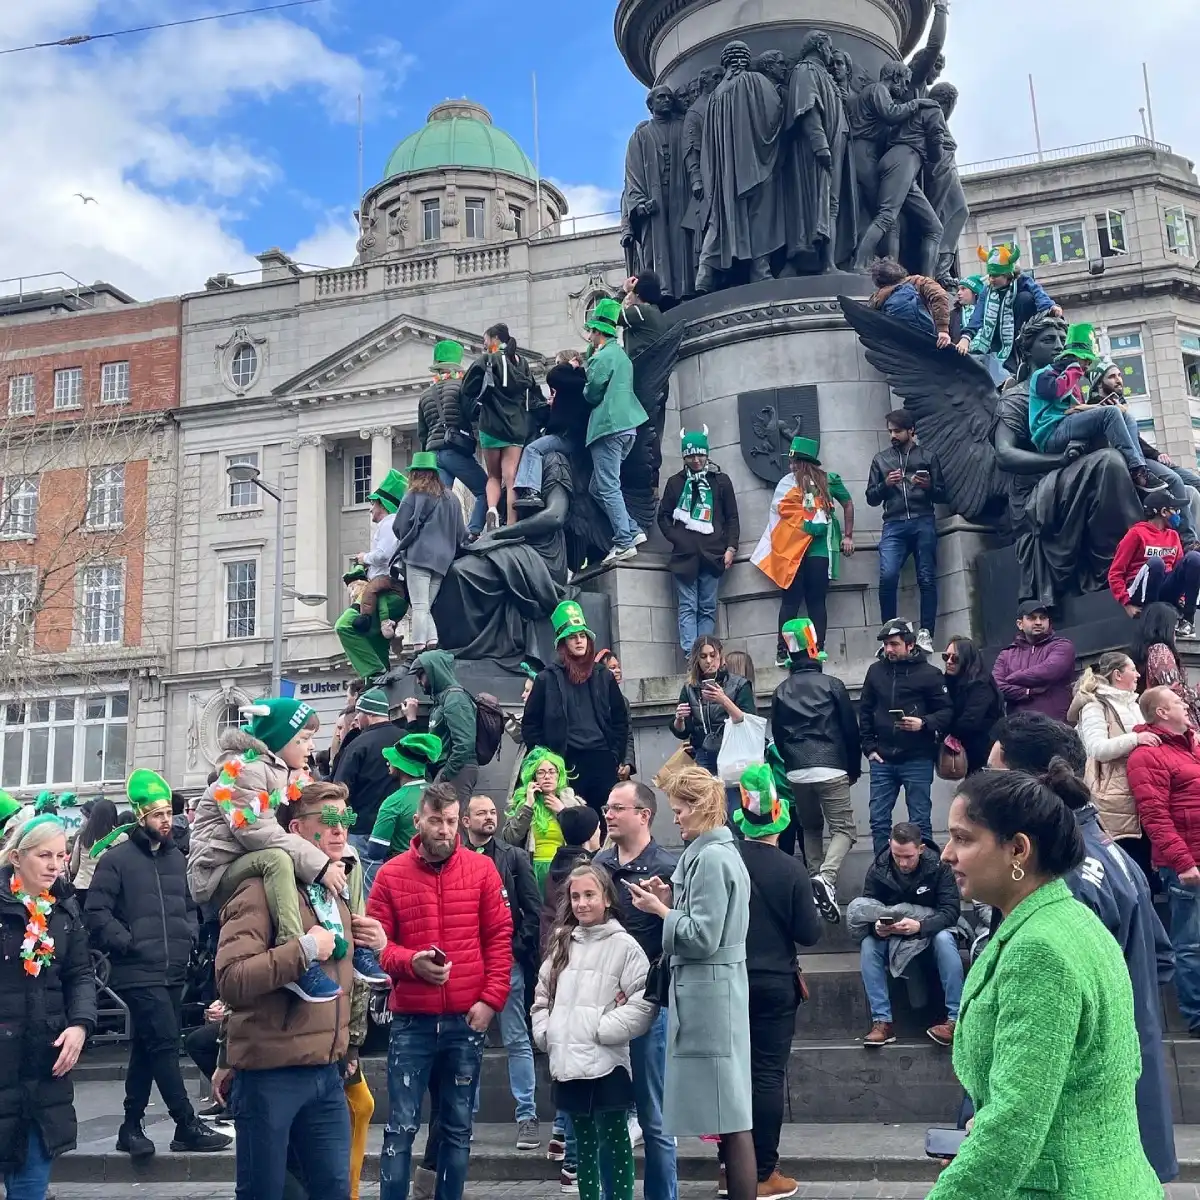 People stand on the steps of a monument dressed in green and wearing leprechaun hats